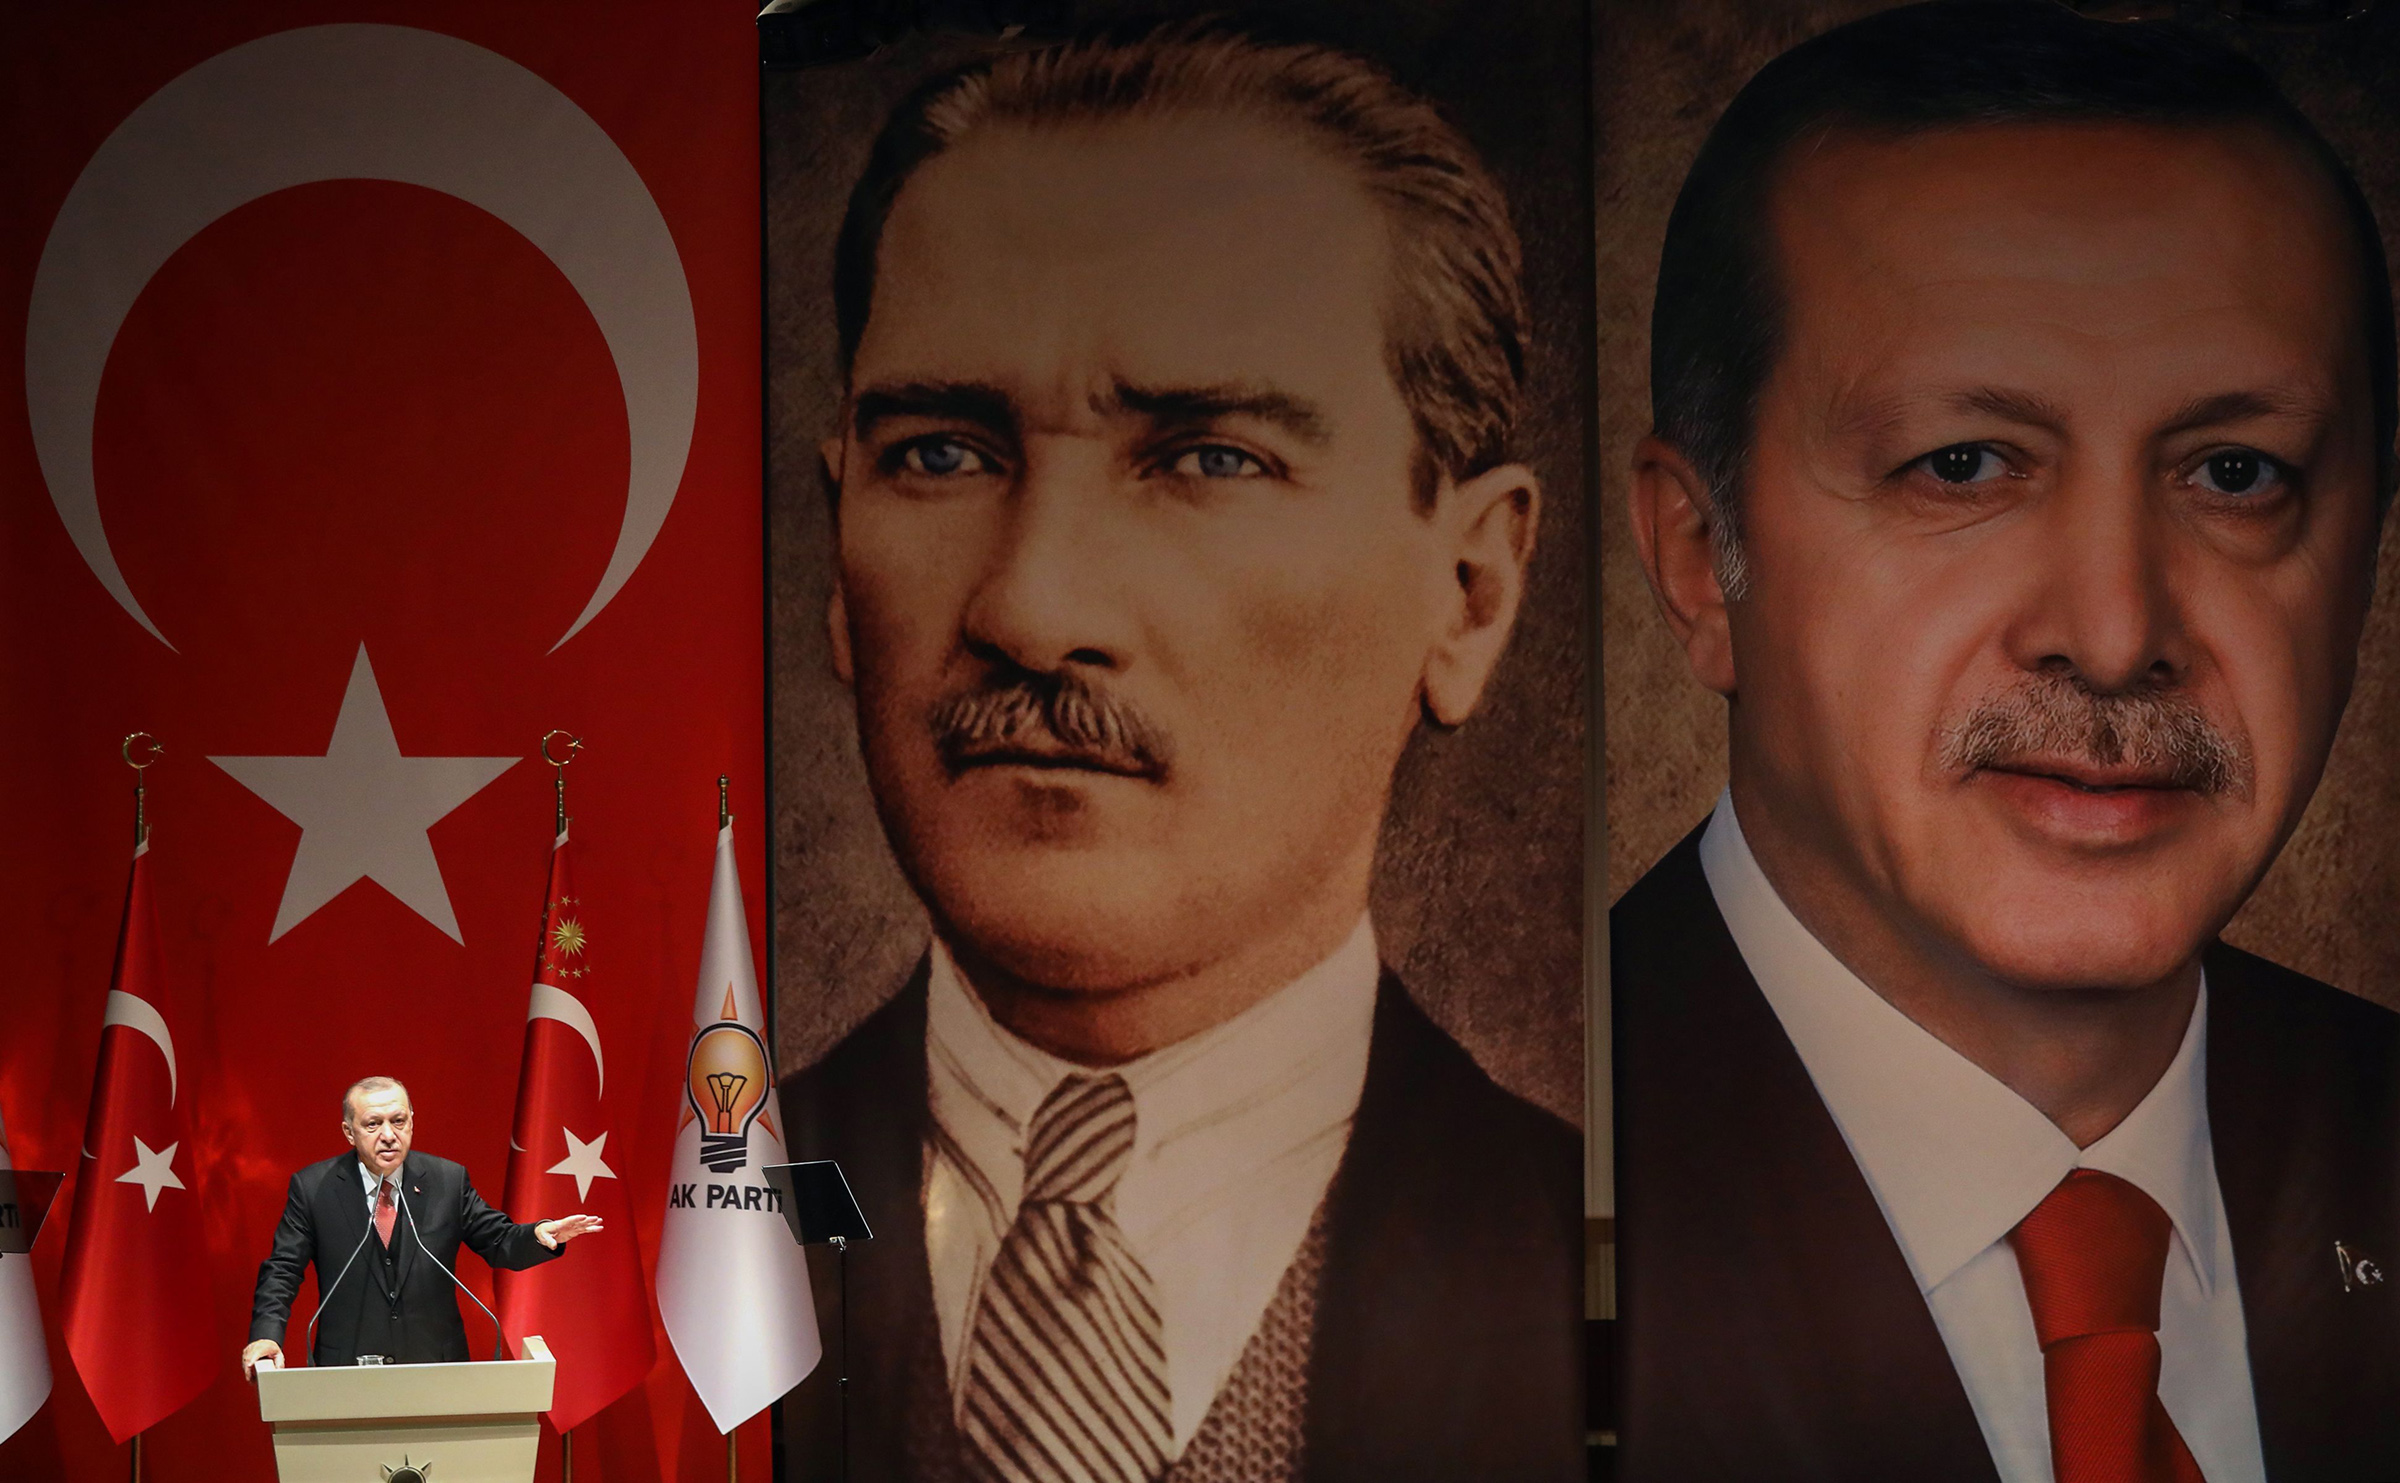 Turkish President Recep Tayyip Erdogan addresses a meeting of election officials in front of portraits of himself and Mustafa Kemal Ataturk, the founder of modern Turkey, in Ankara on Jan. 29, 2019. (Adem Altan— AFP/Getty Images)